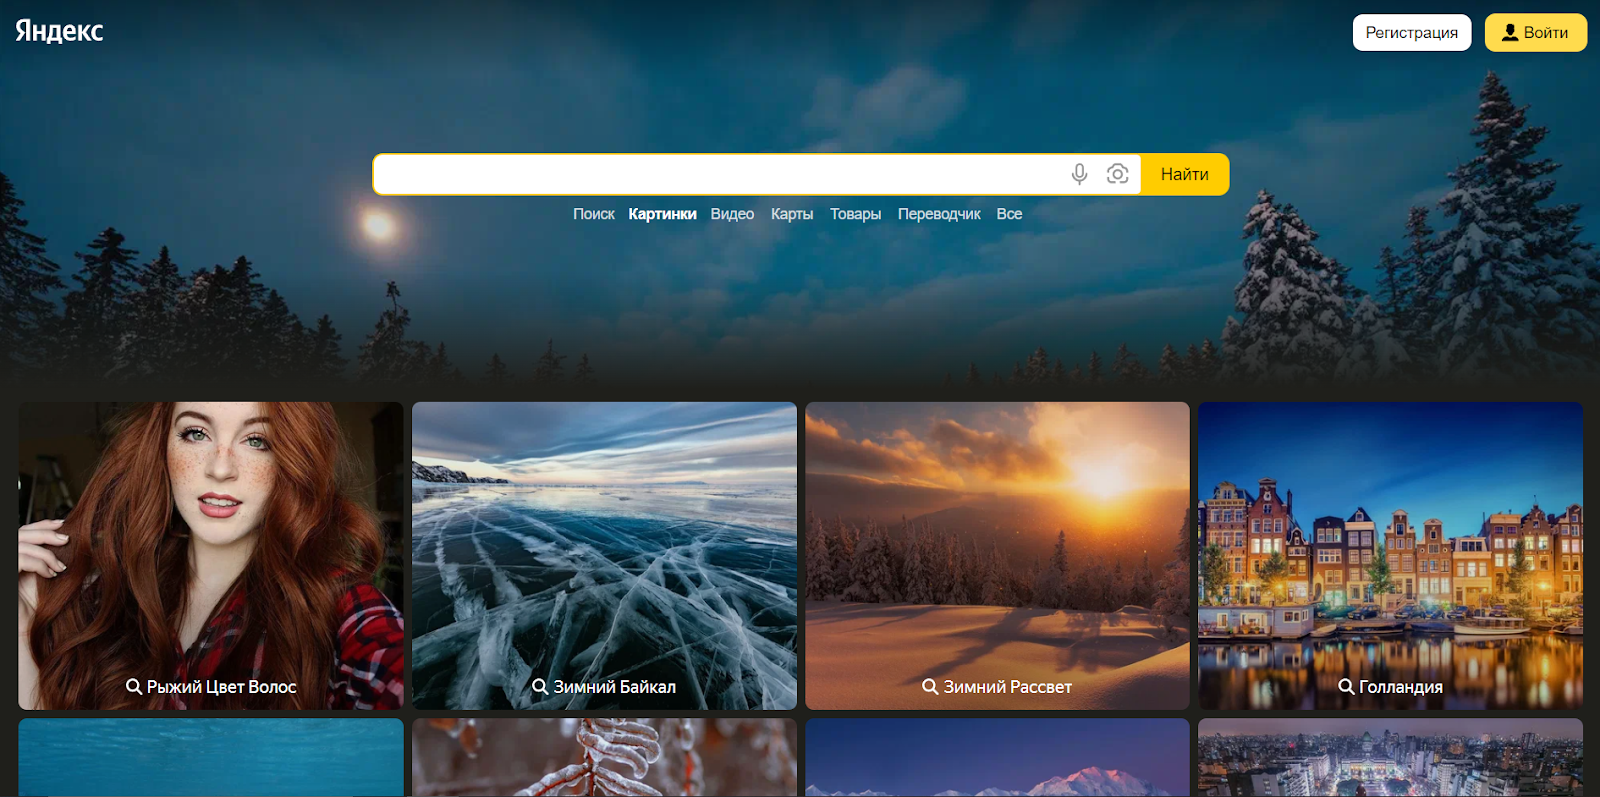 how to use yandex reverse image